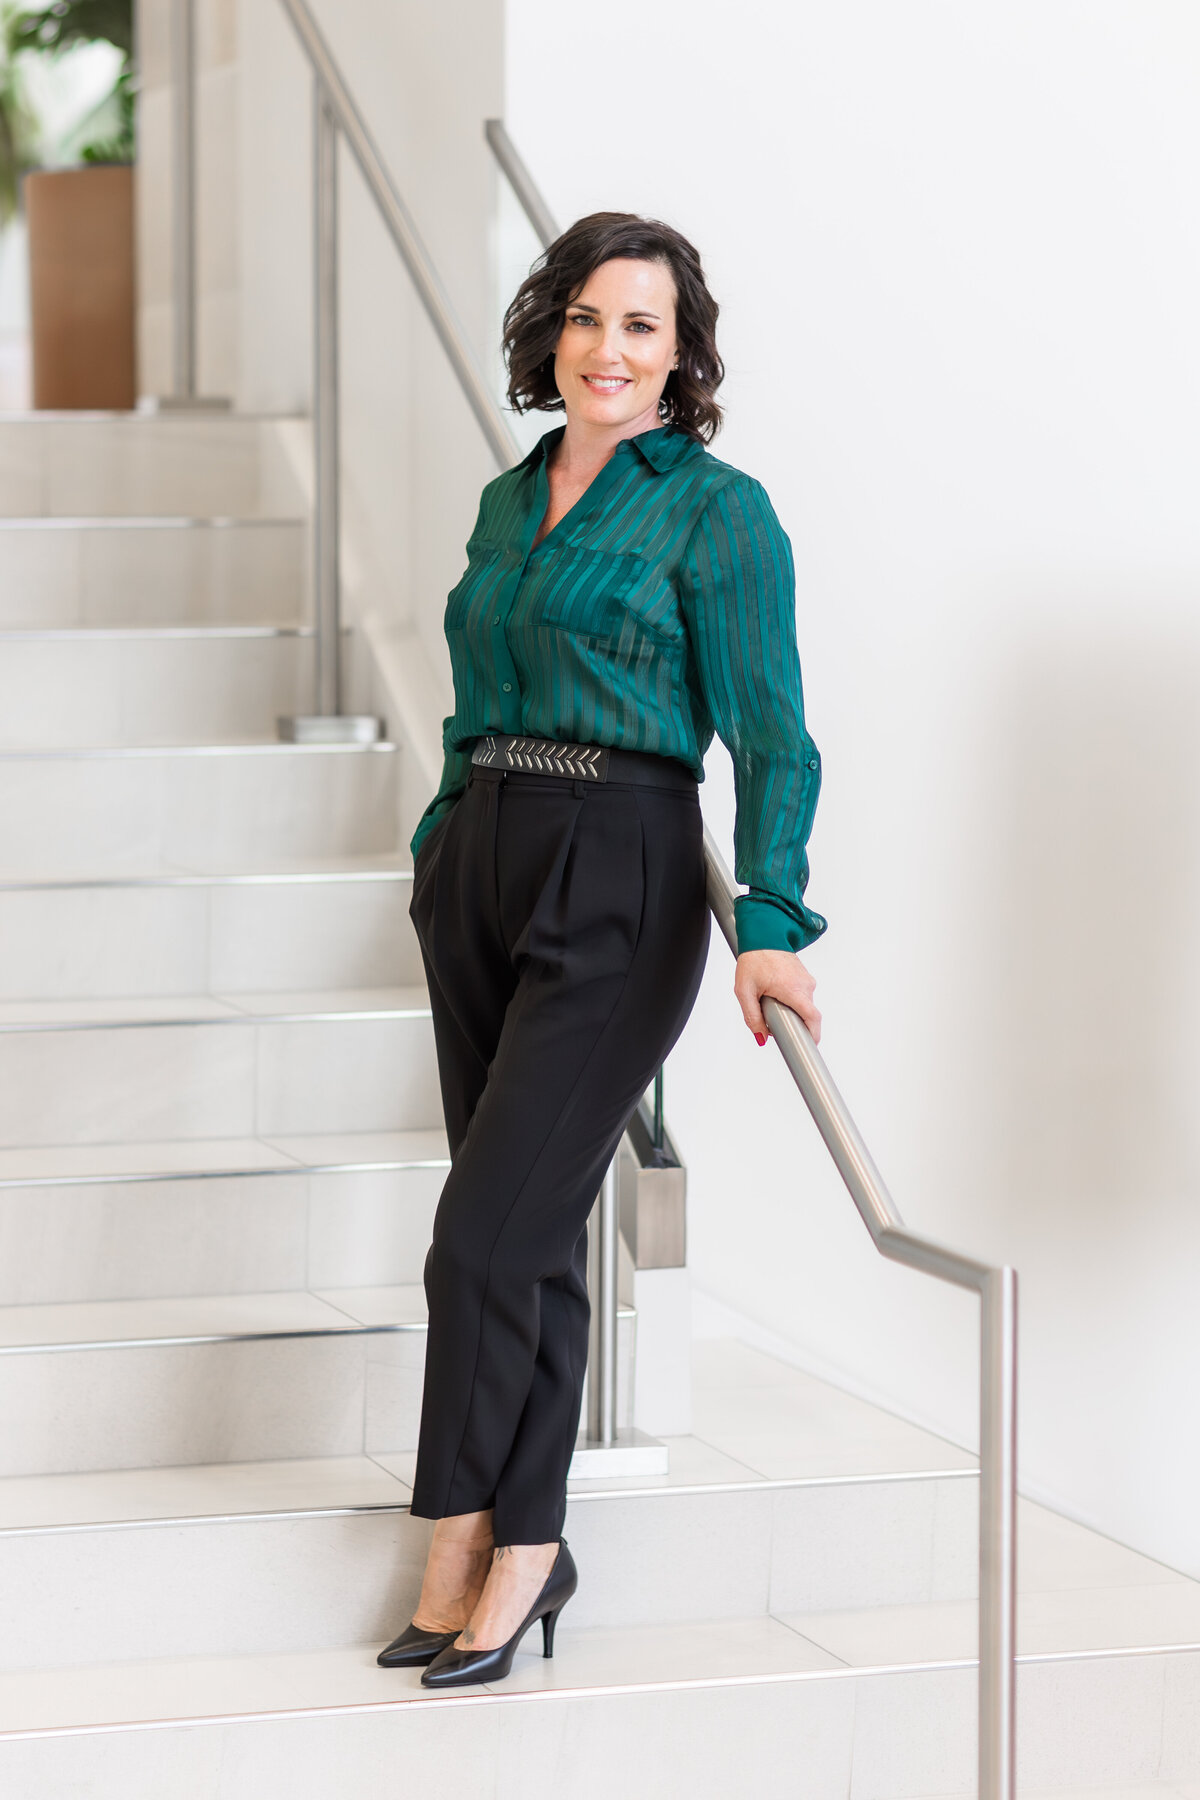 personal-branding-photo-shoot-realtor-standing-on-stairs